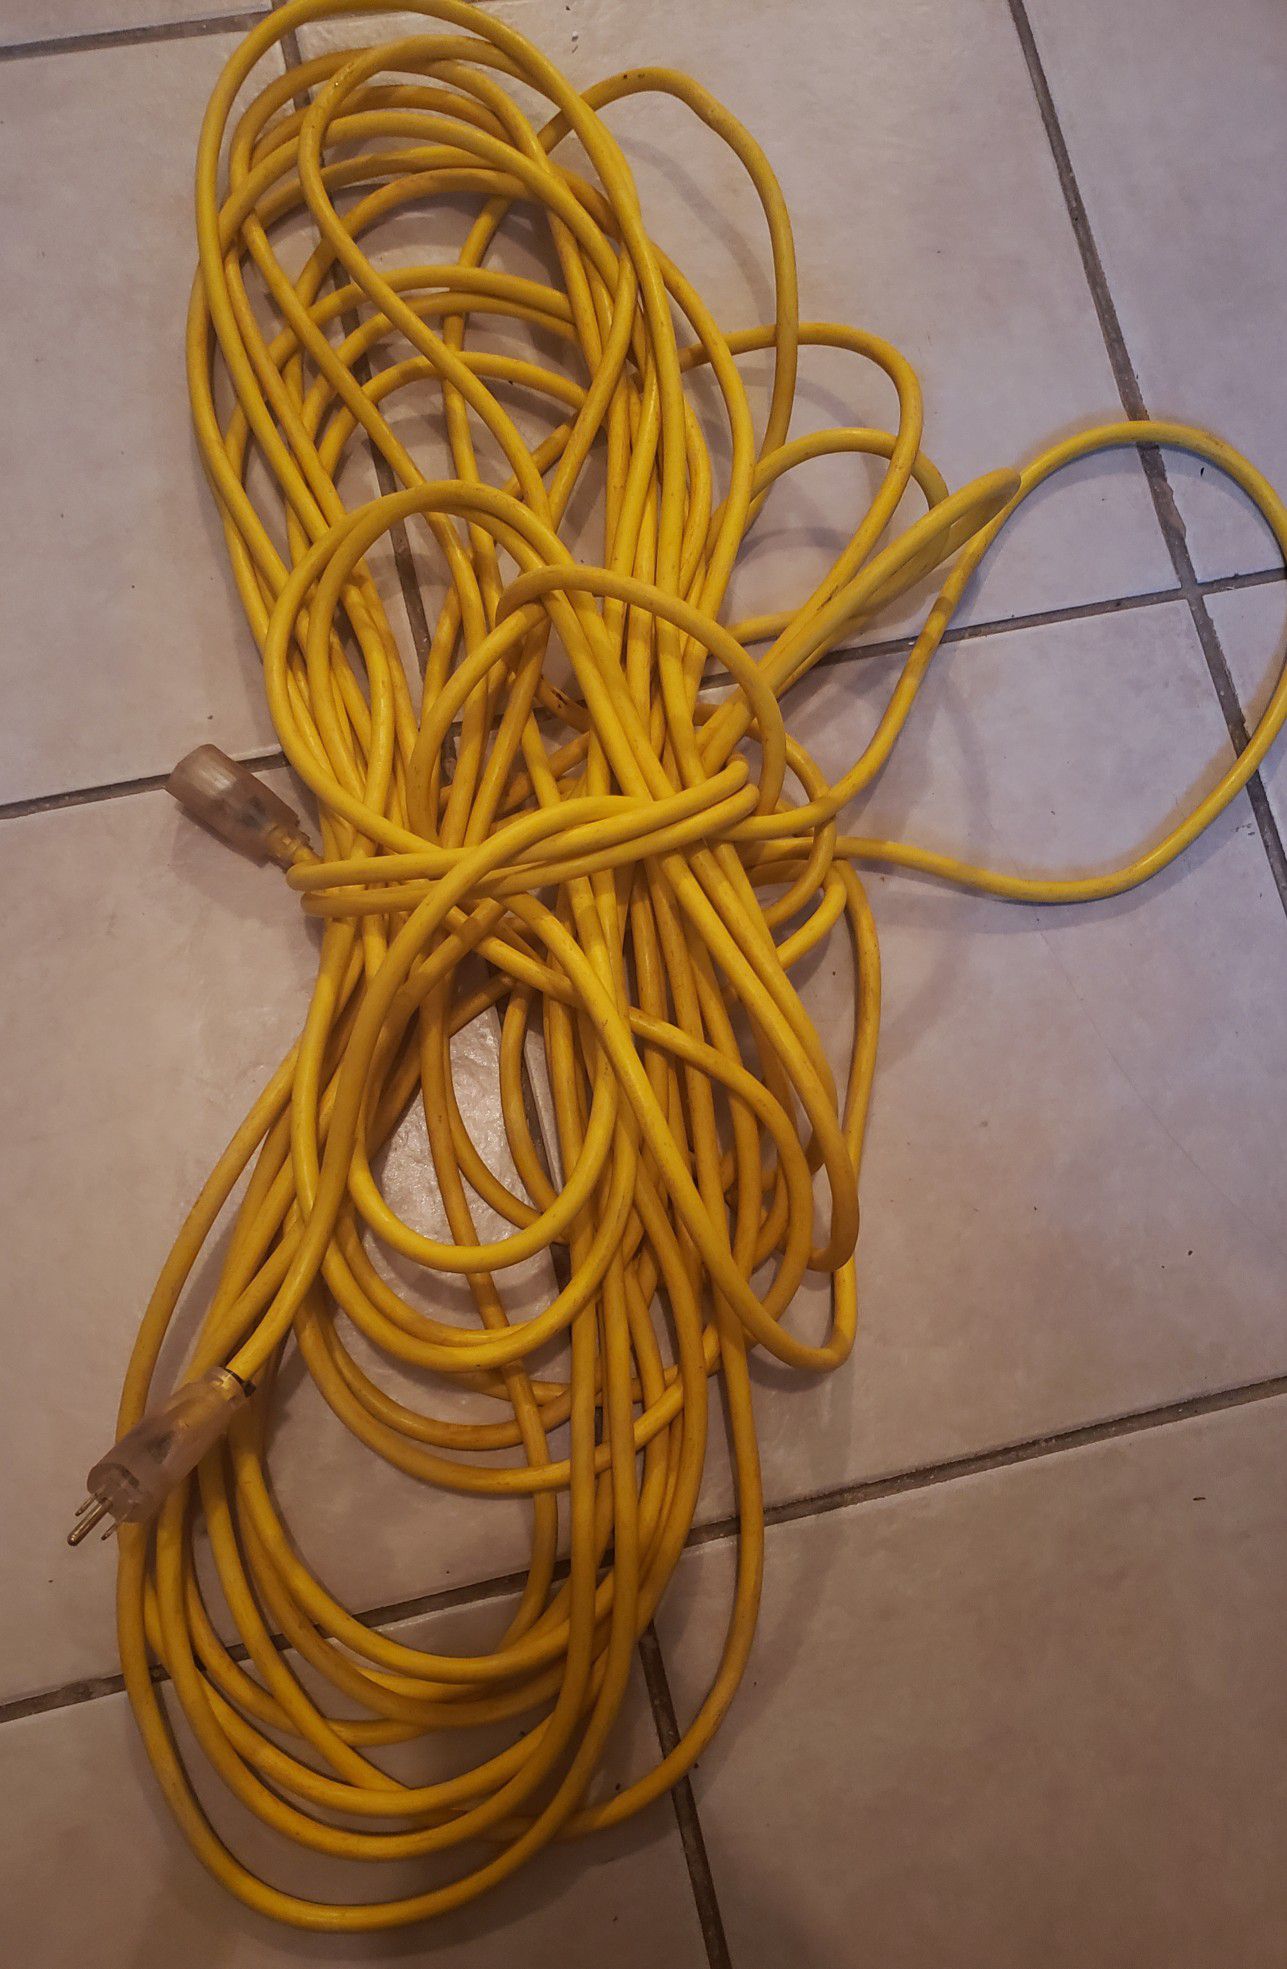 Heavy Duty Extension Cord, 100ft... $90